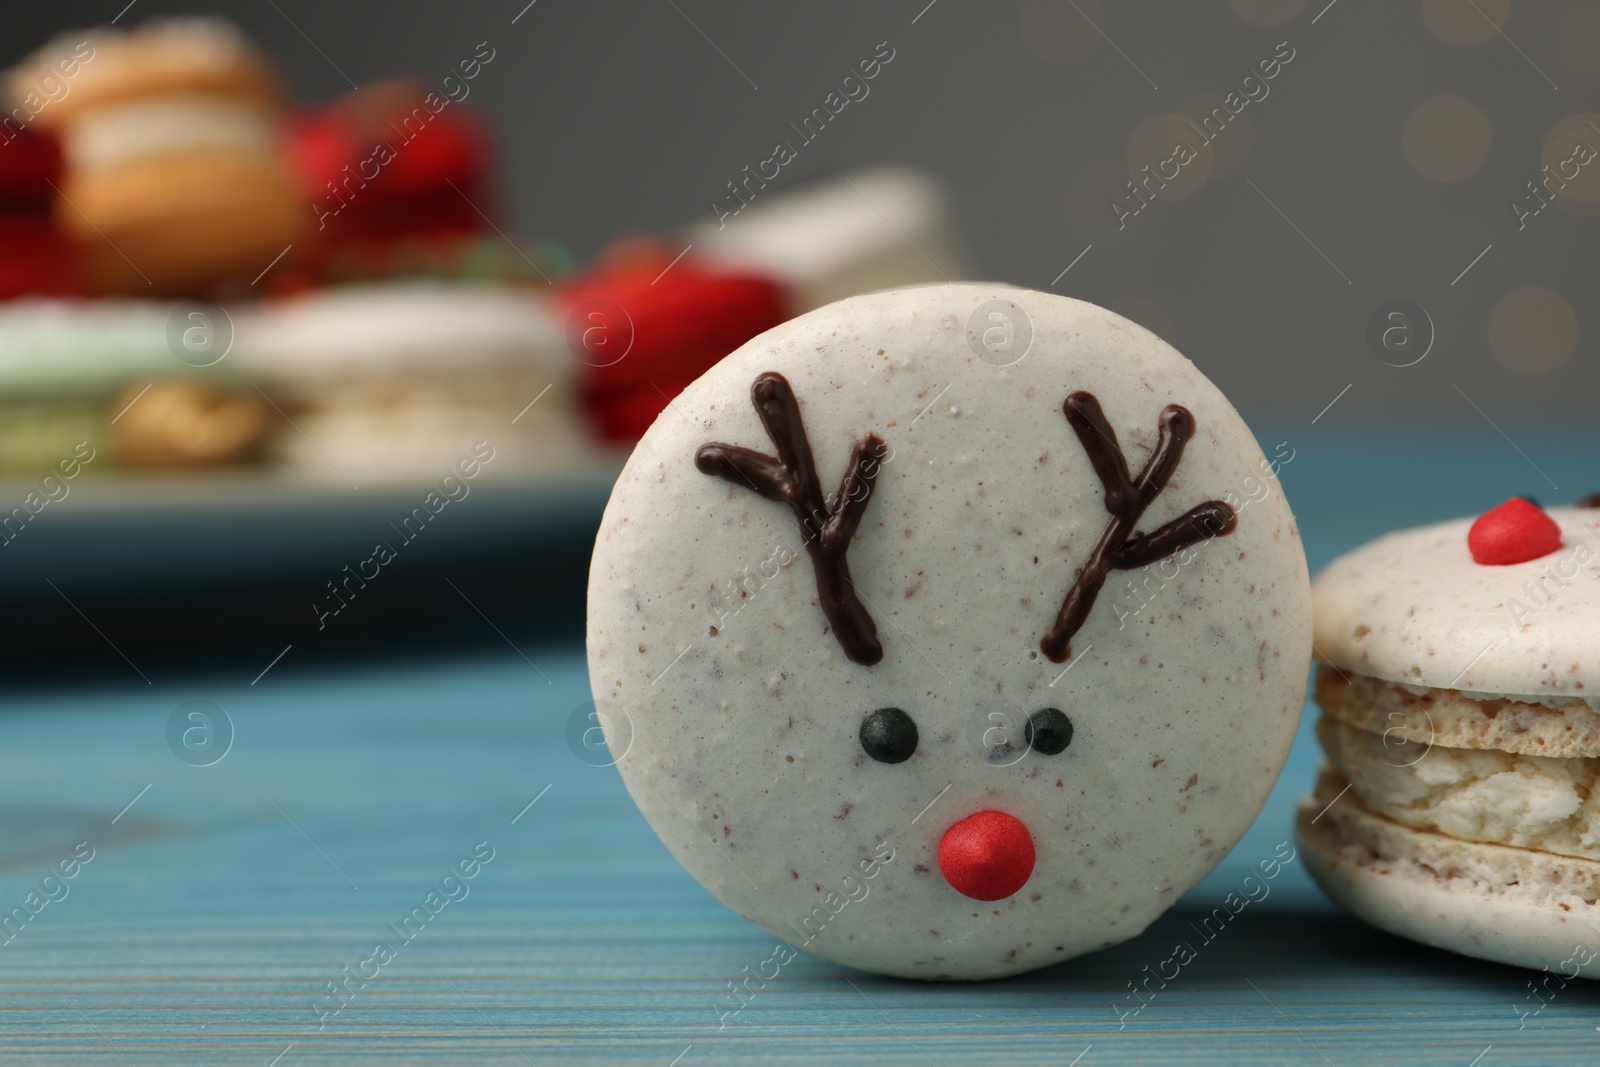 Photo of Tasty reindeer Christmas macarons on light blue wooden table against blurred festive lights, closeup